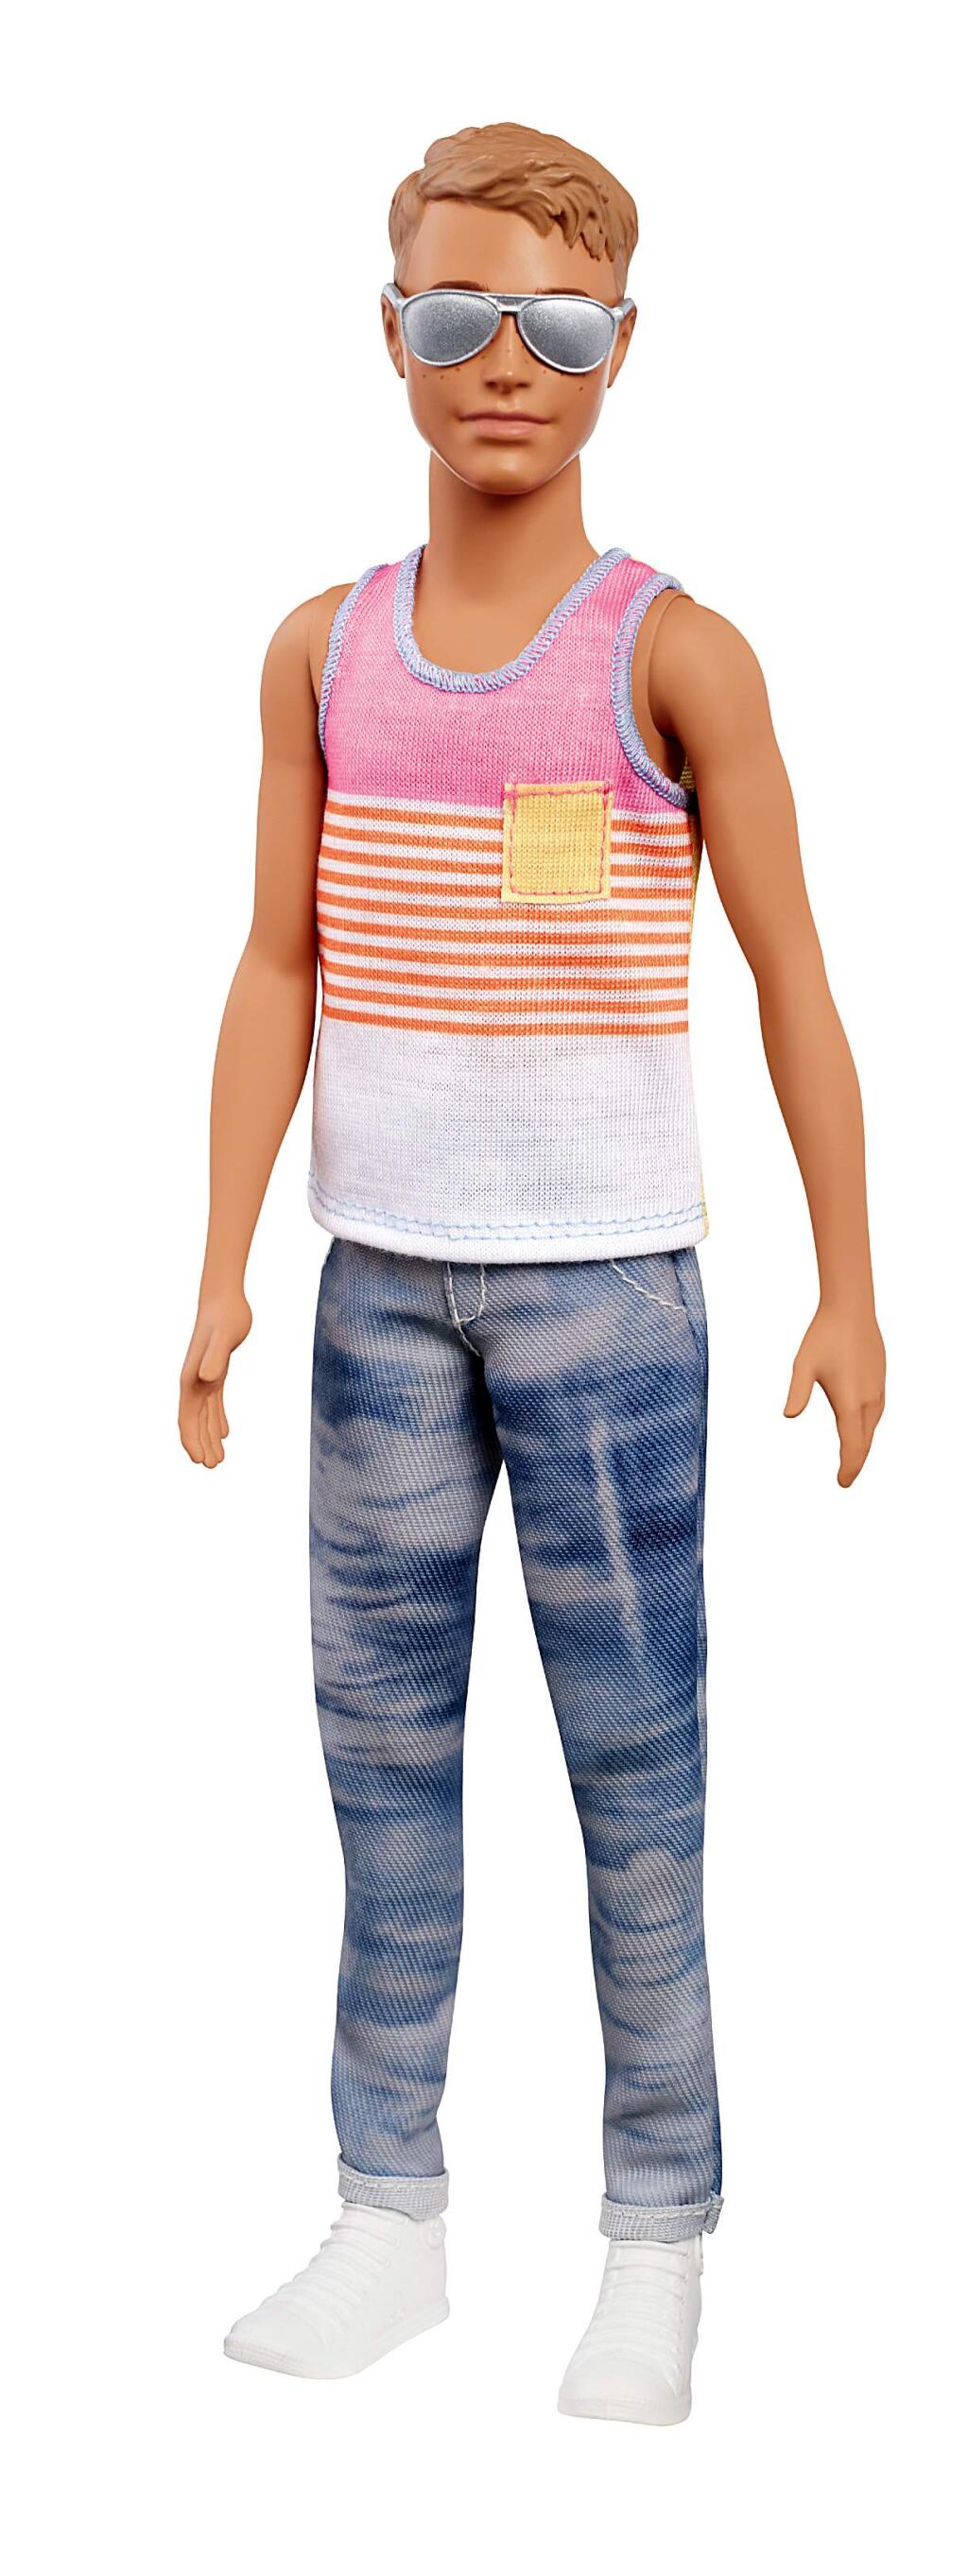 This photo provided by Mattel shows a slim body-style Ken doll, wearing sunglasses. Mattel announced Tuesday, June 20, 2017, that the company is introducing 15 new looks for the male doll, giving him new skin tones, body shapes and hair styles. The makeover is part of the toy company's plan to make its dolls more diverse and try to appeal to today's kids, many of whom would rather pick up an iPad than a doll. Barbie received a similar overhaul more than a year earlier. (Courtesy of Mattel via AP)